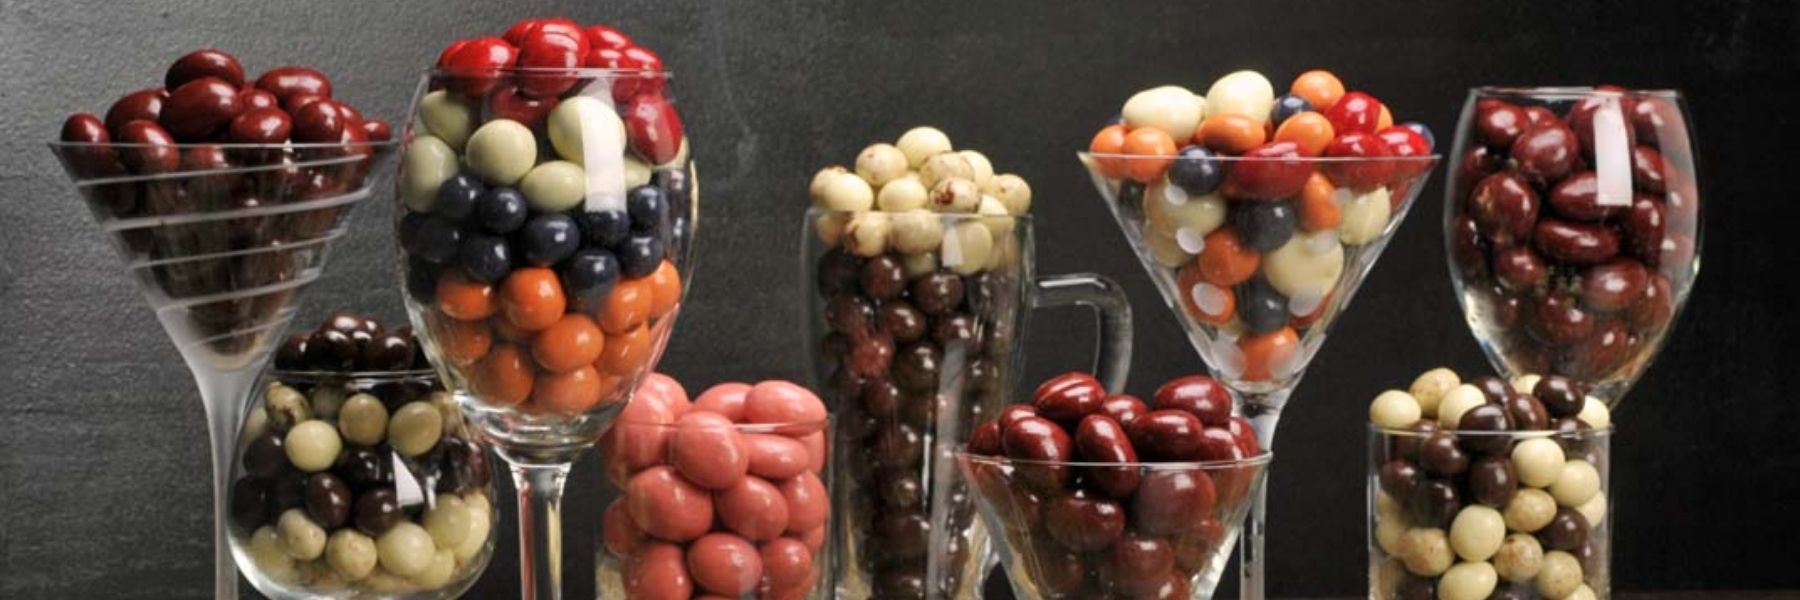 Dilettante Chocolates Chocolate-Covered Fruit in Fancy Glasses on Display